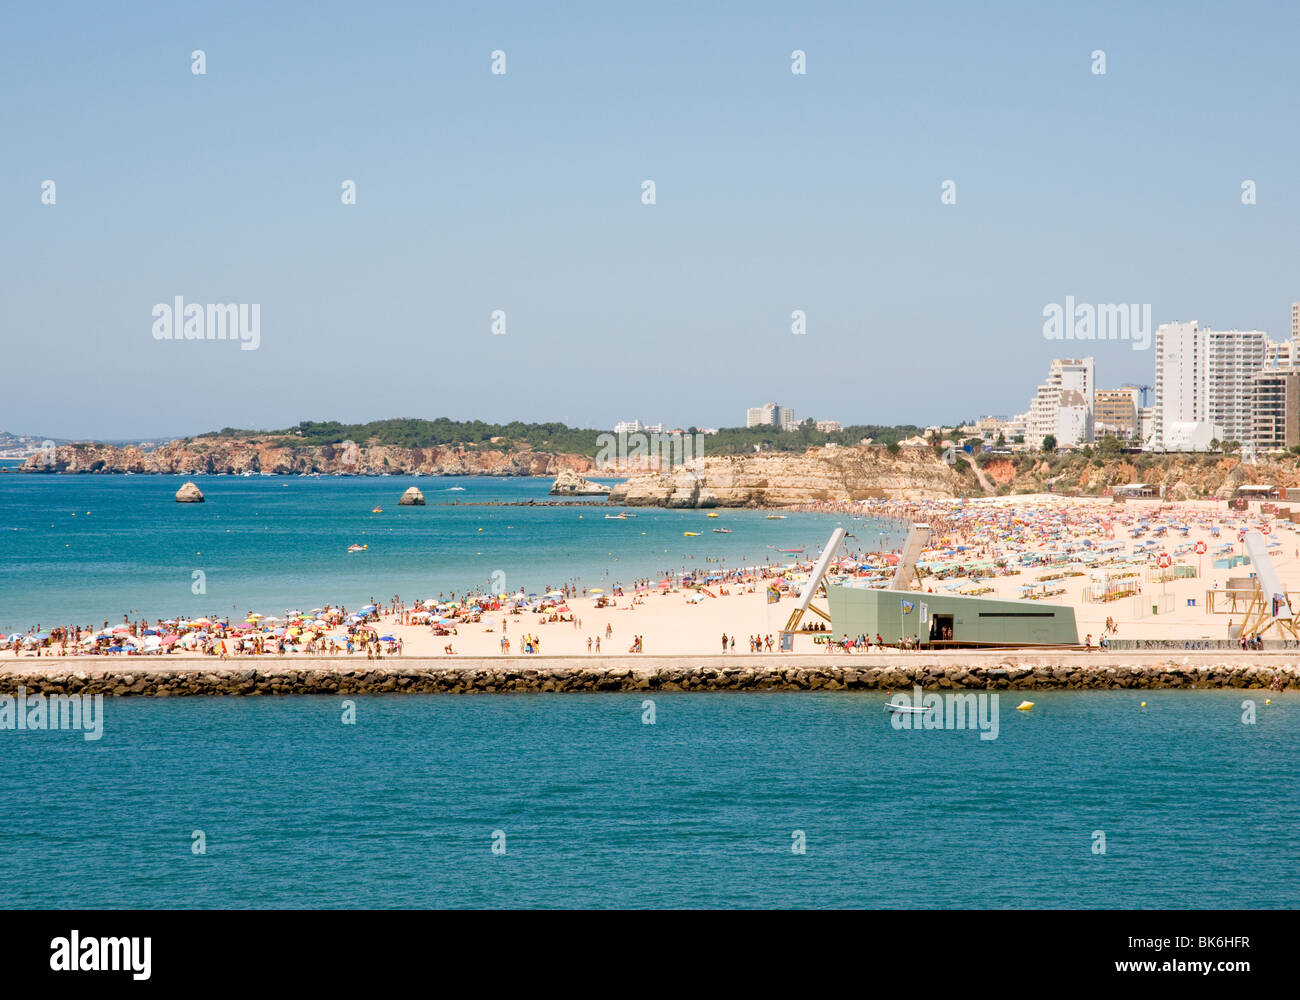 The beach at Praia da Rocha in Portimão, in the Algarve, southern Portugal. The breakwater can be seen in the foreground. Stock Photo